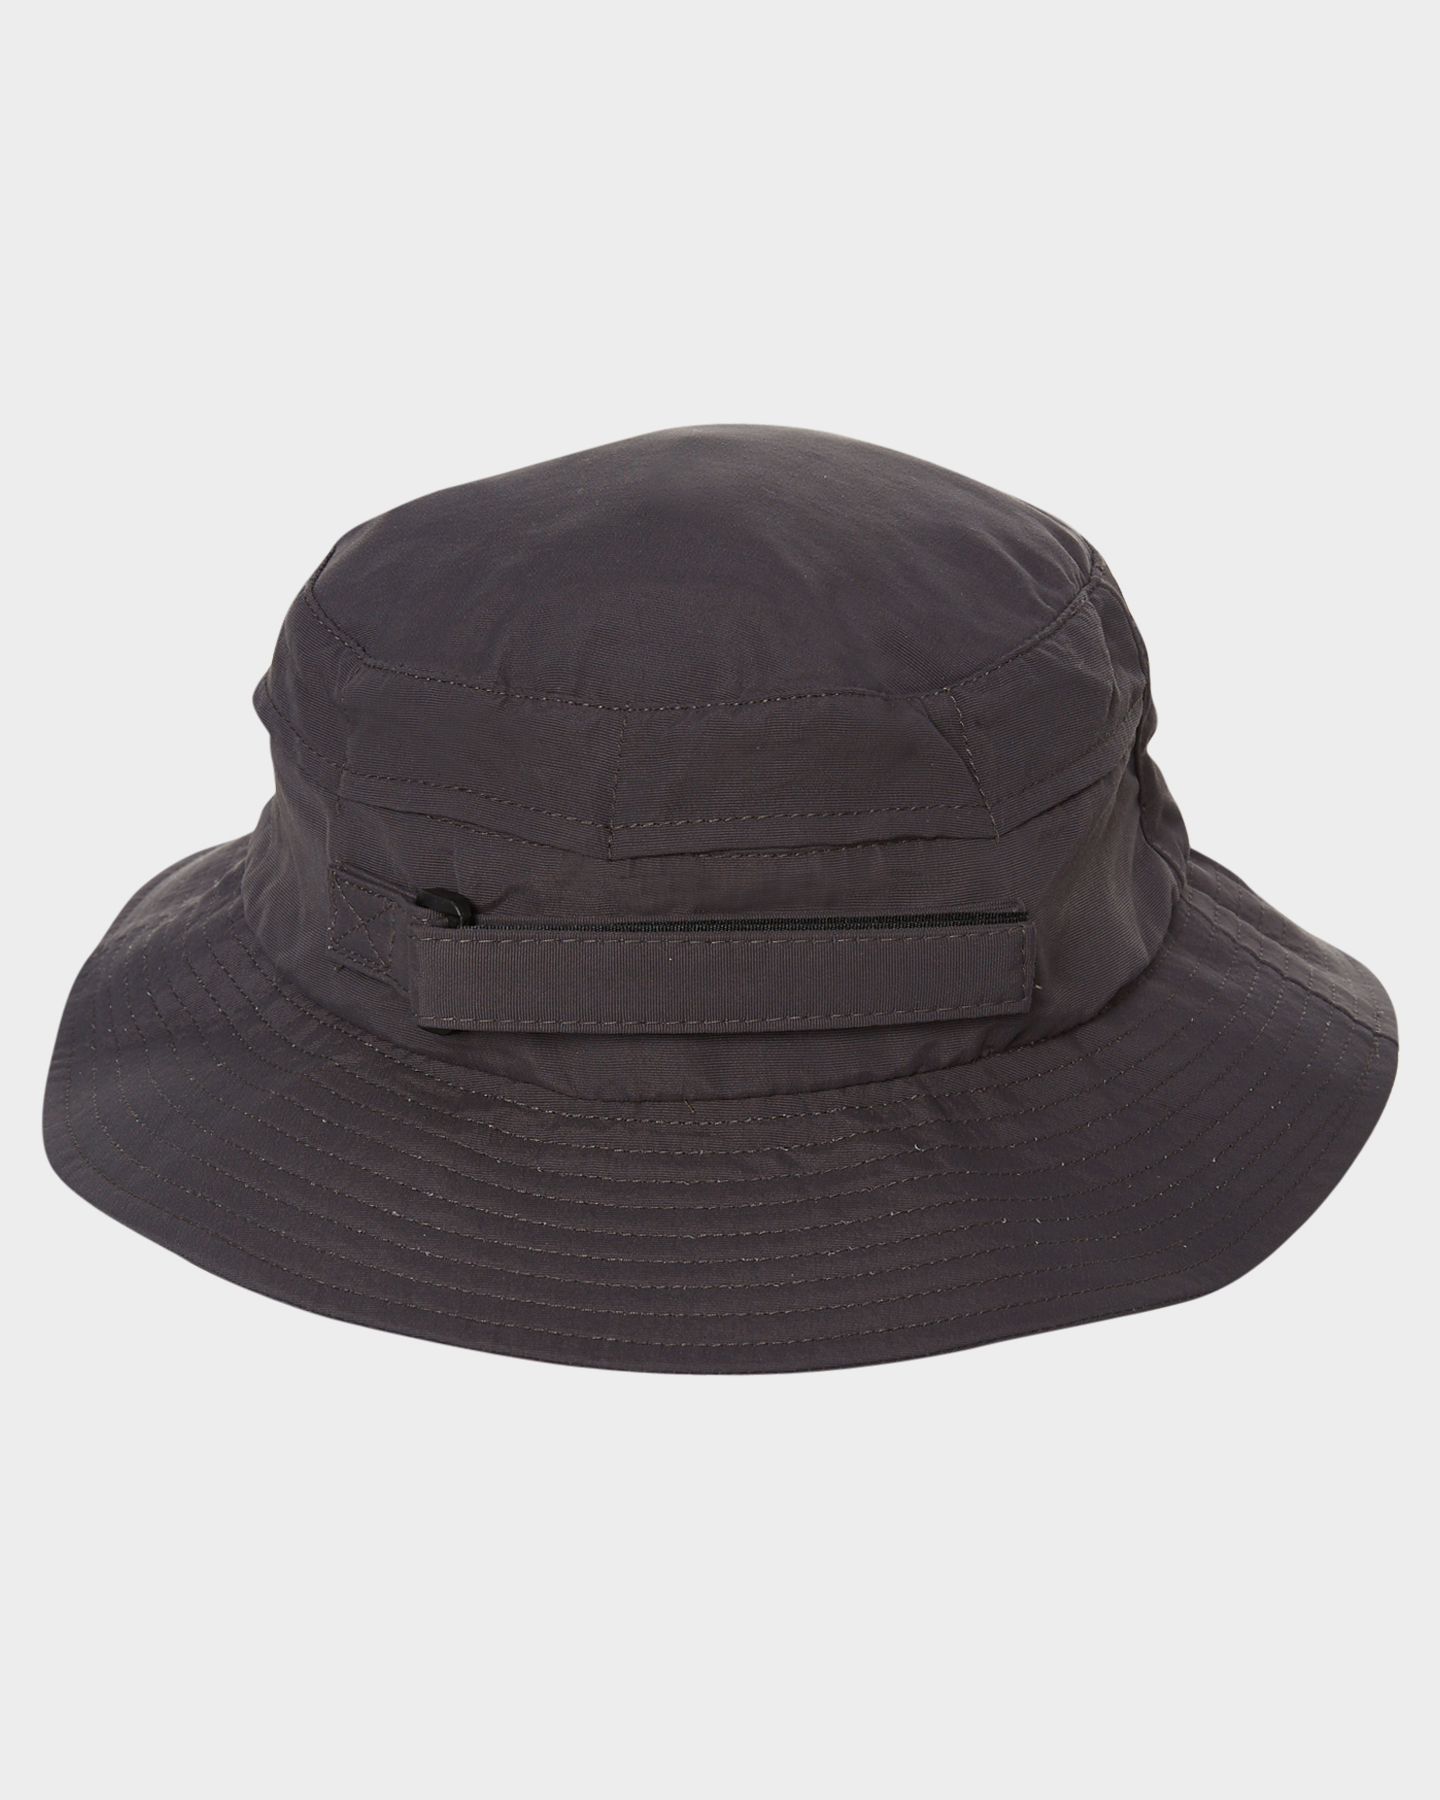 Ocean And Earth Indo Surf Hat - Black | SurfStitch